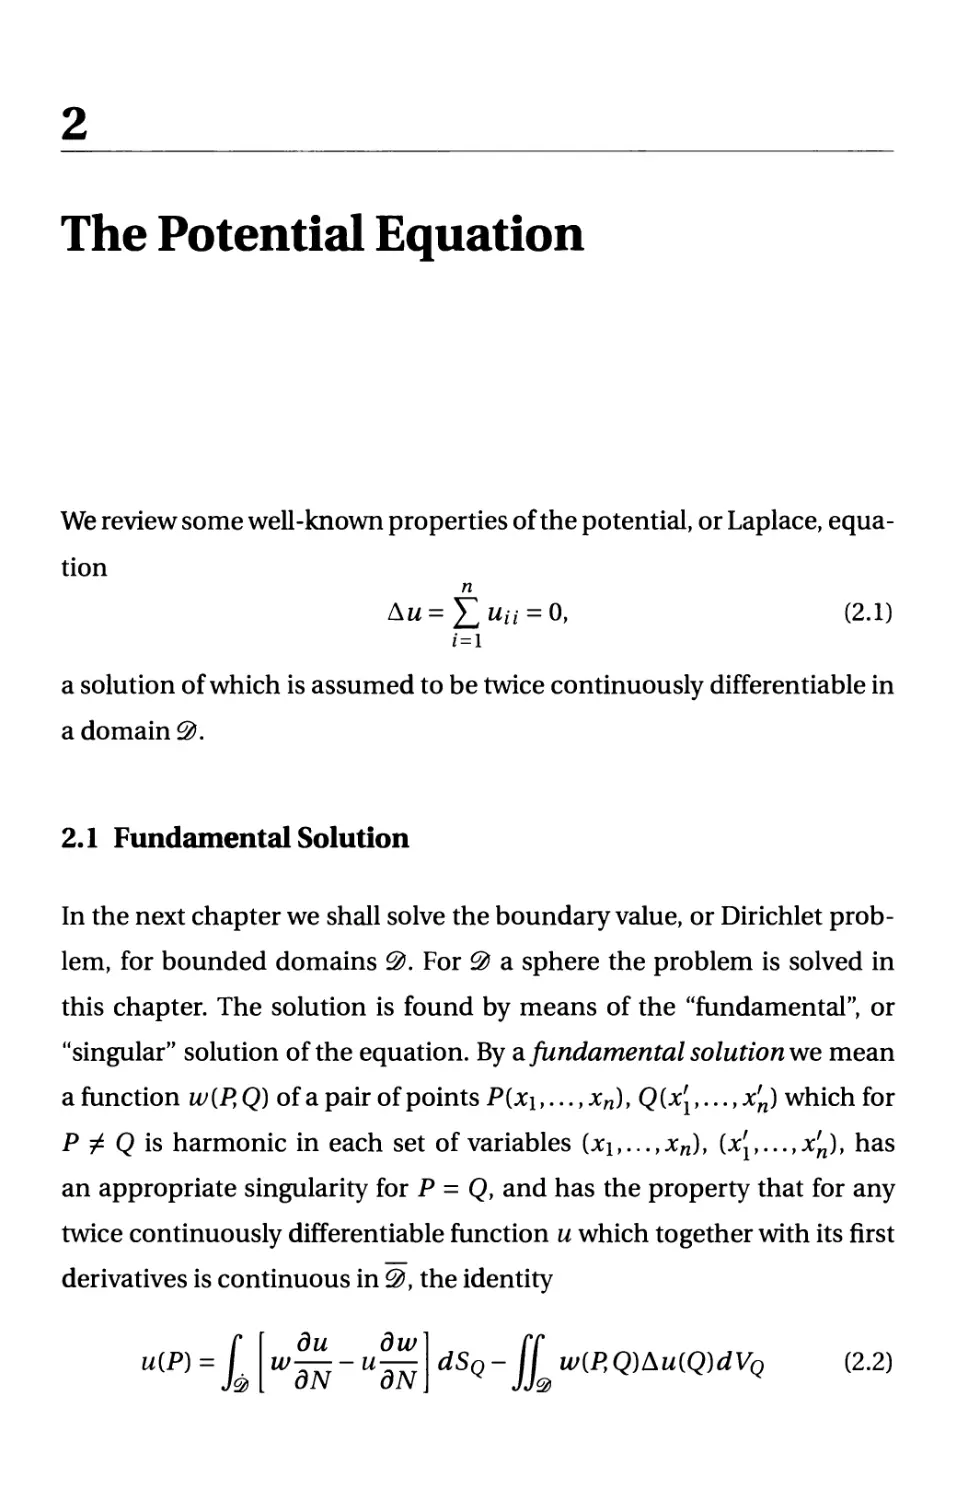 2. The Potential Equation
2.1 Fundamental Solution